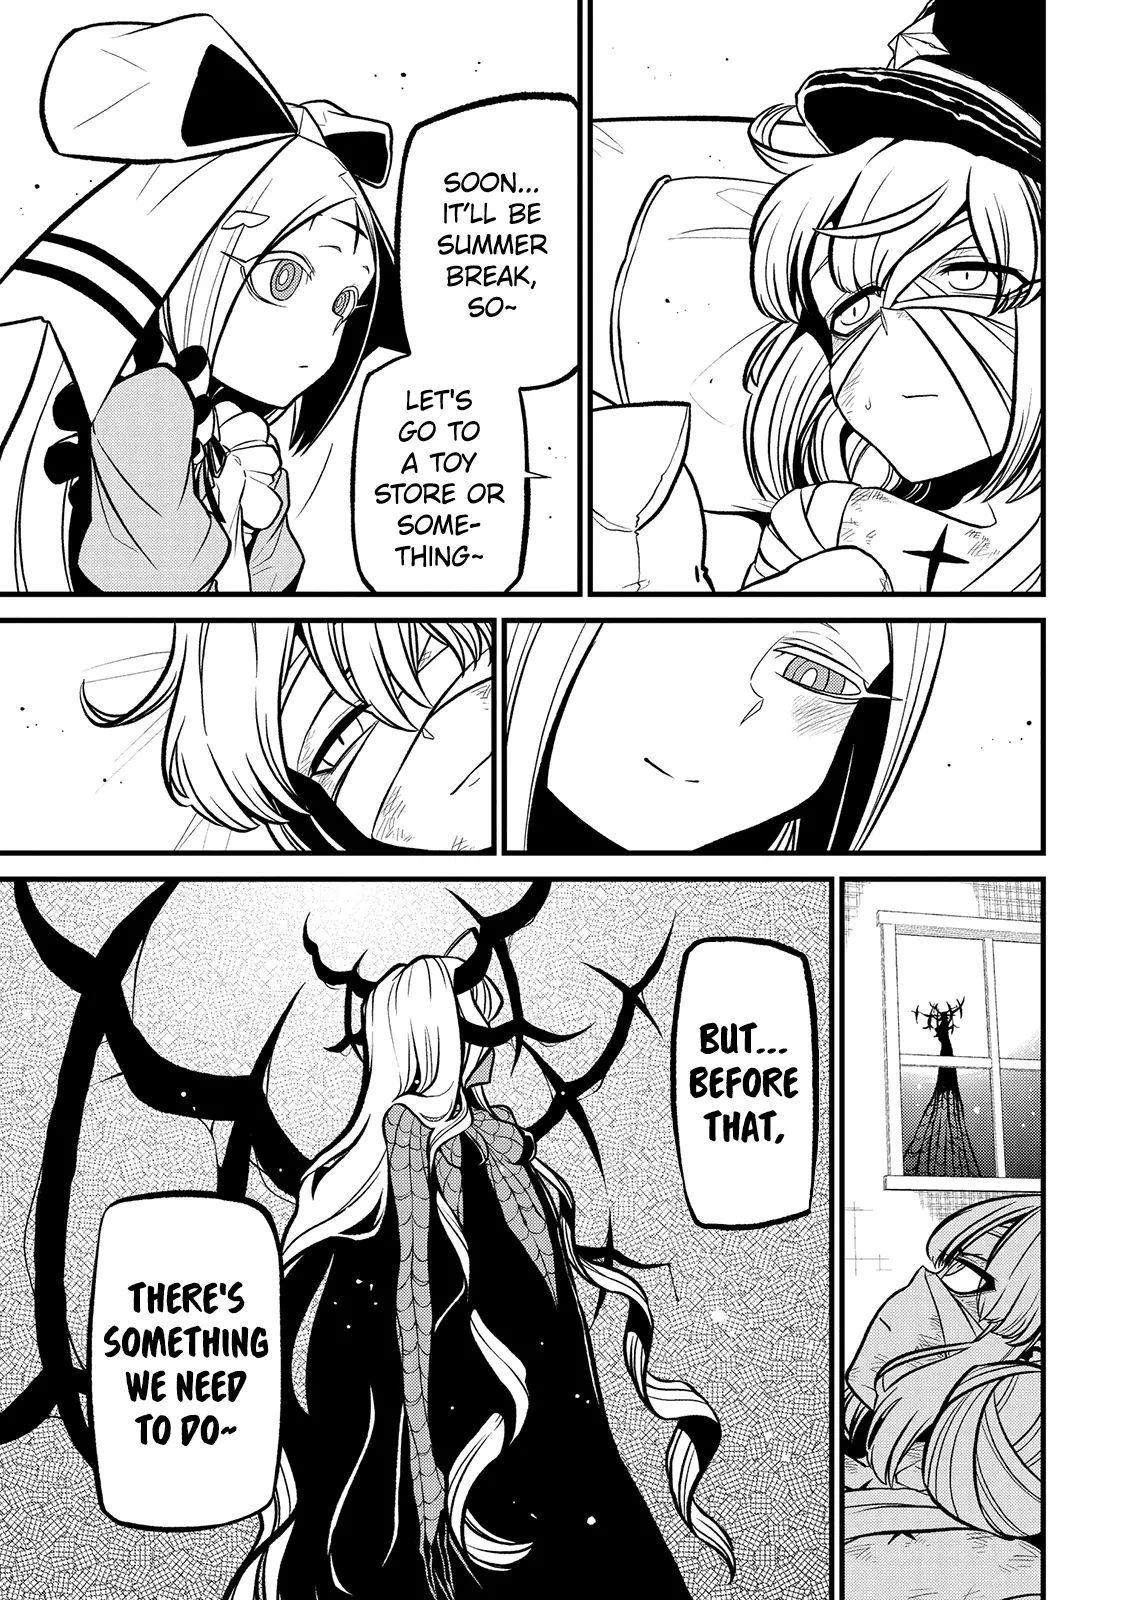 Looking Up To Magical Girls - 35 page 6-7568d92e